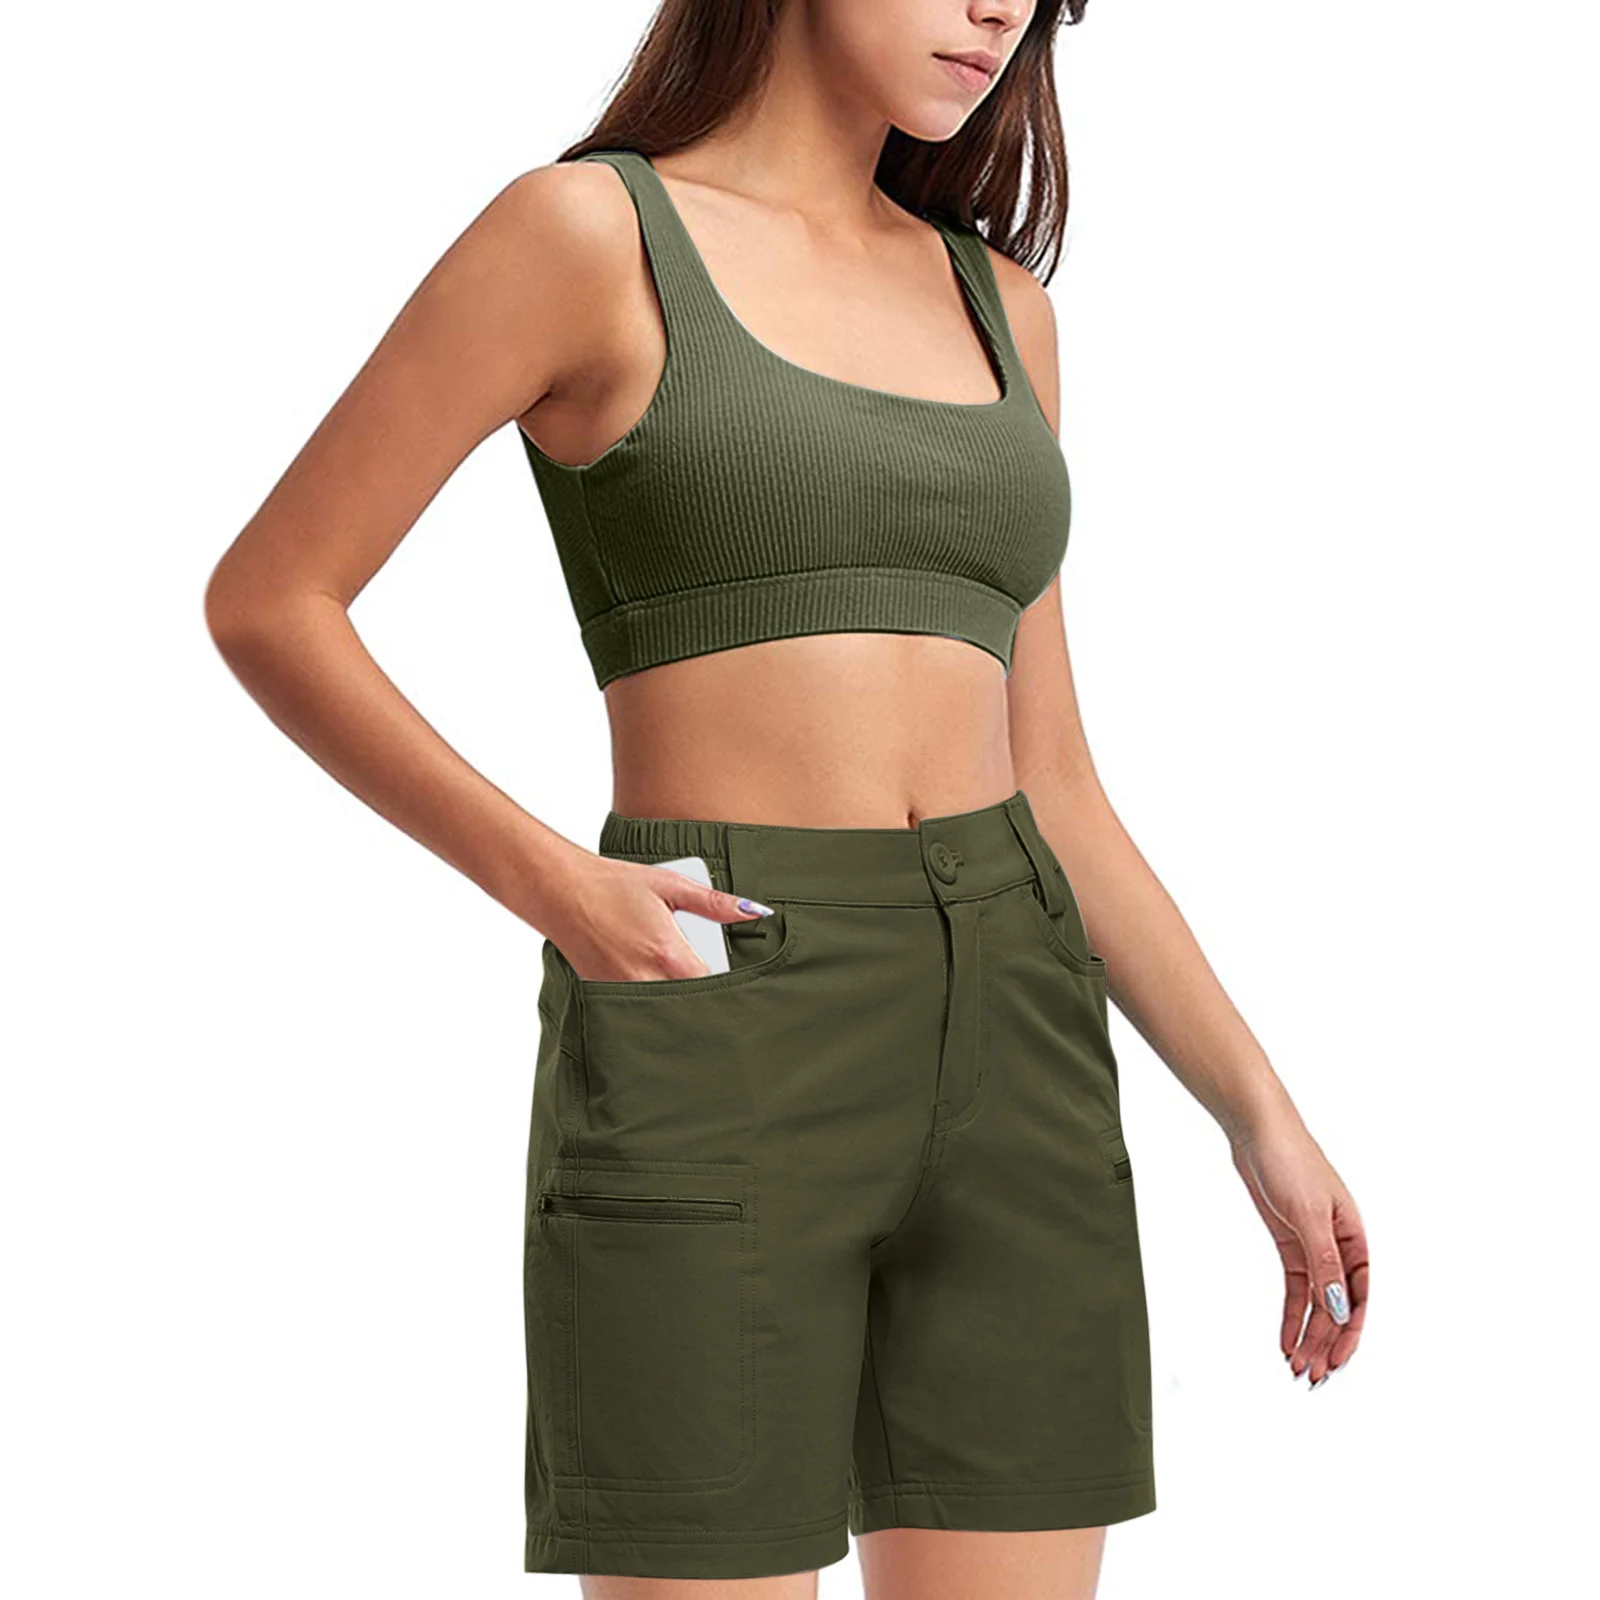 Women Summer Casual Shorts 2021 New Style Fashion Solid Color Side Pockets Zipper Cargo Short Pants for Women High Waist Shorts soffe shorts